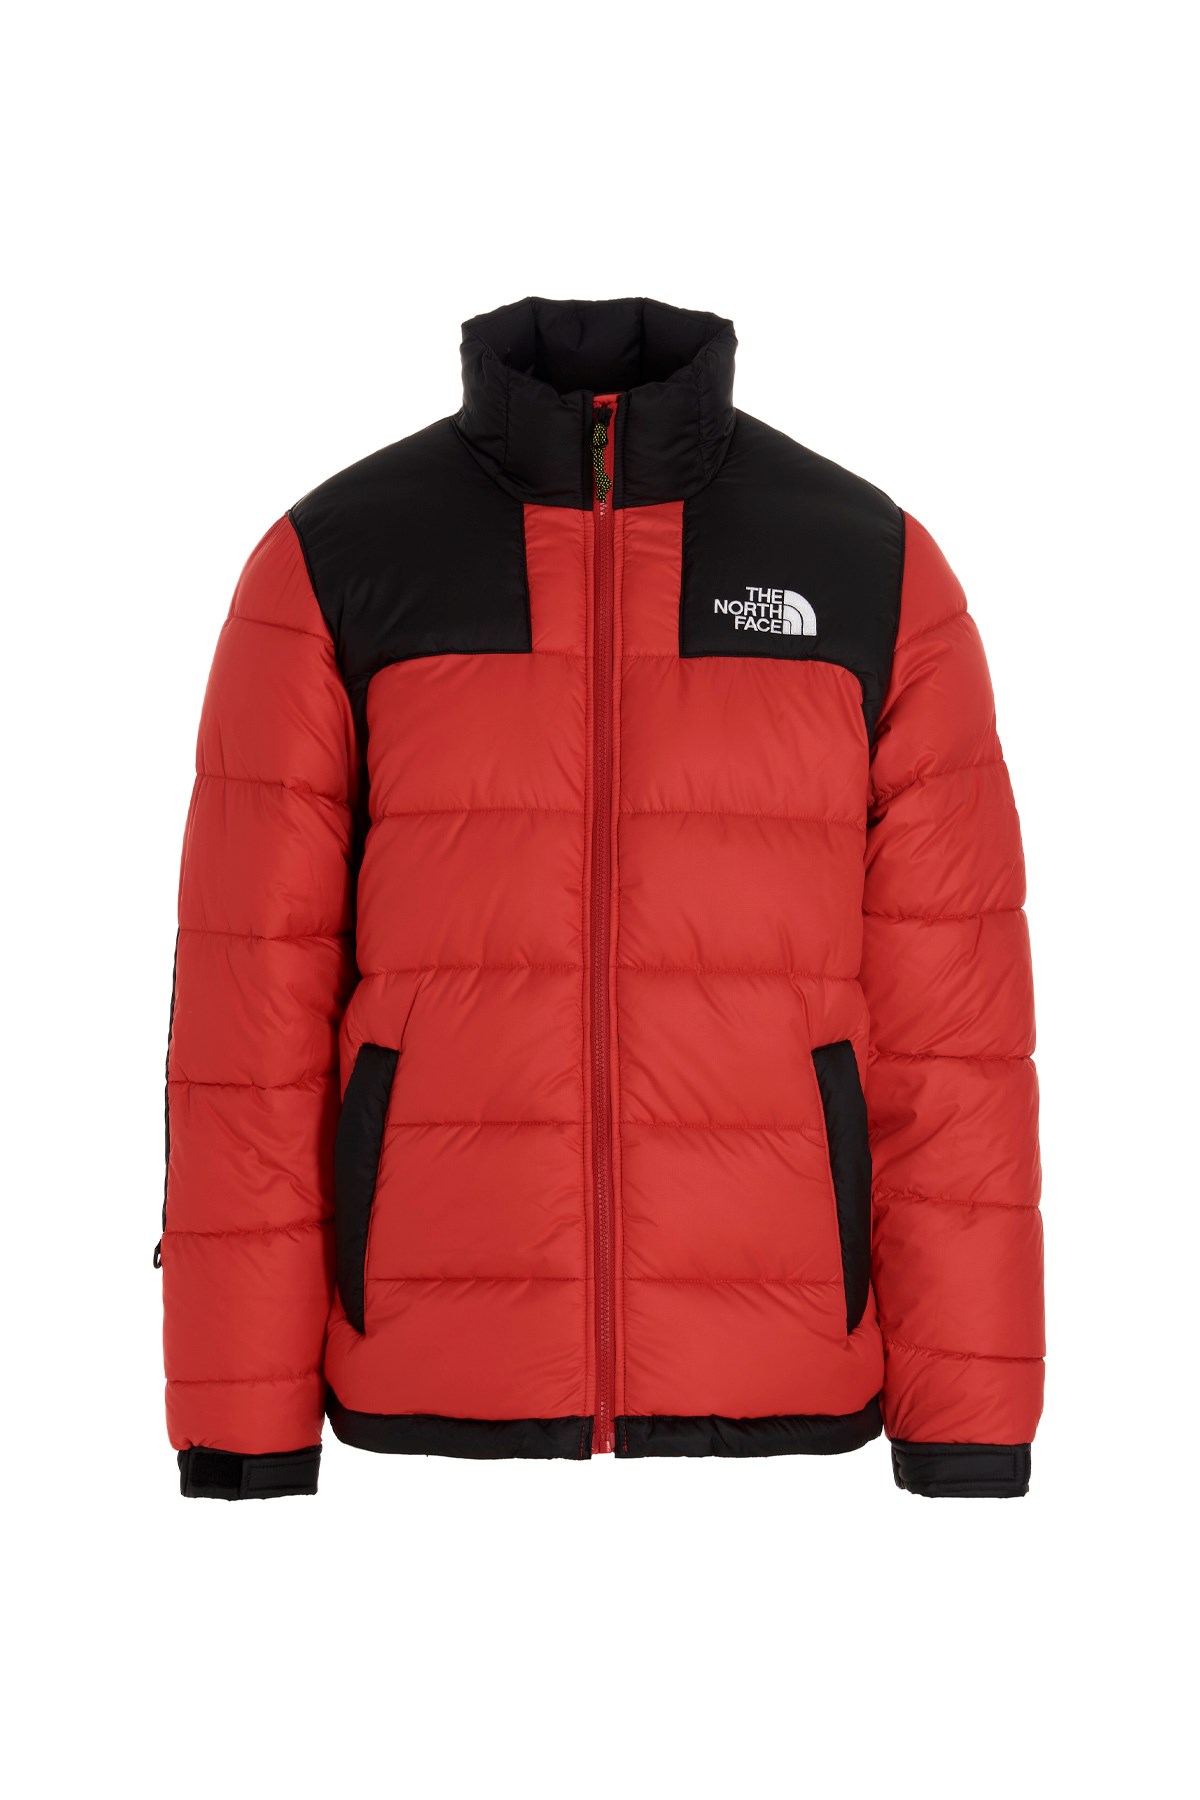 THE NORTH FACE 'Bb Search & Rescue Synth Ins’ Puffer Jacket